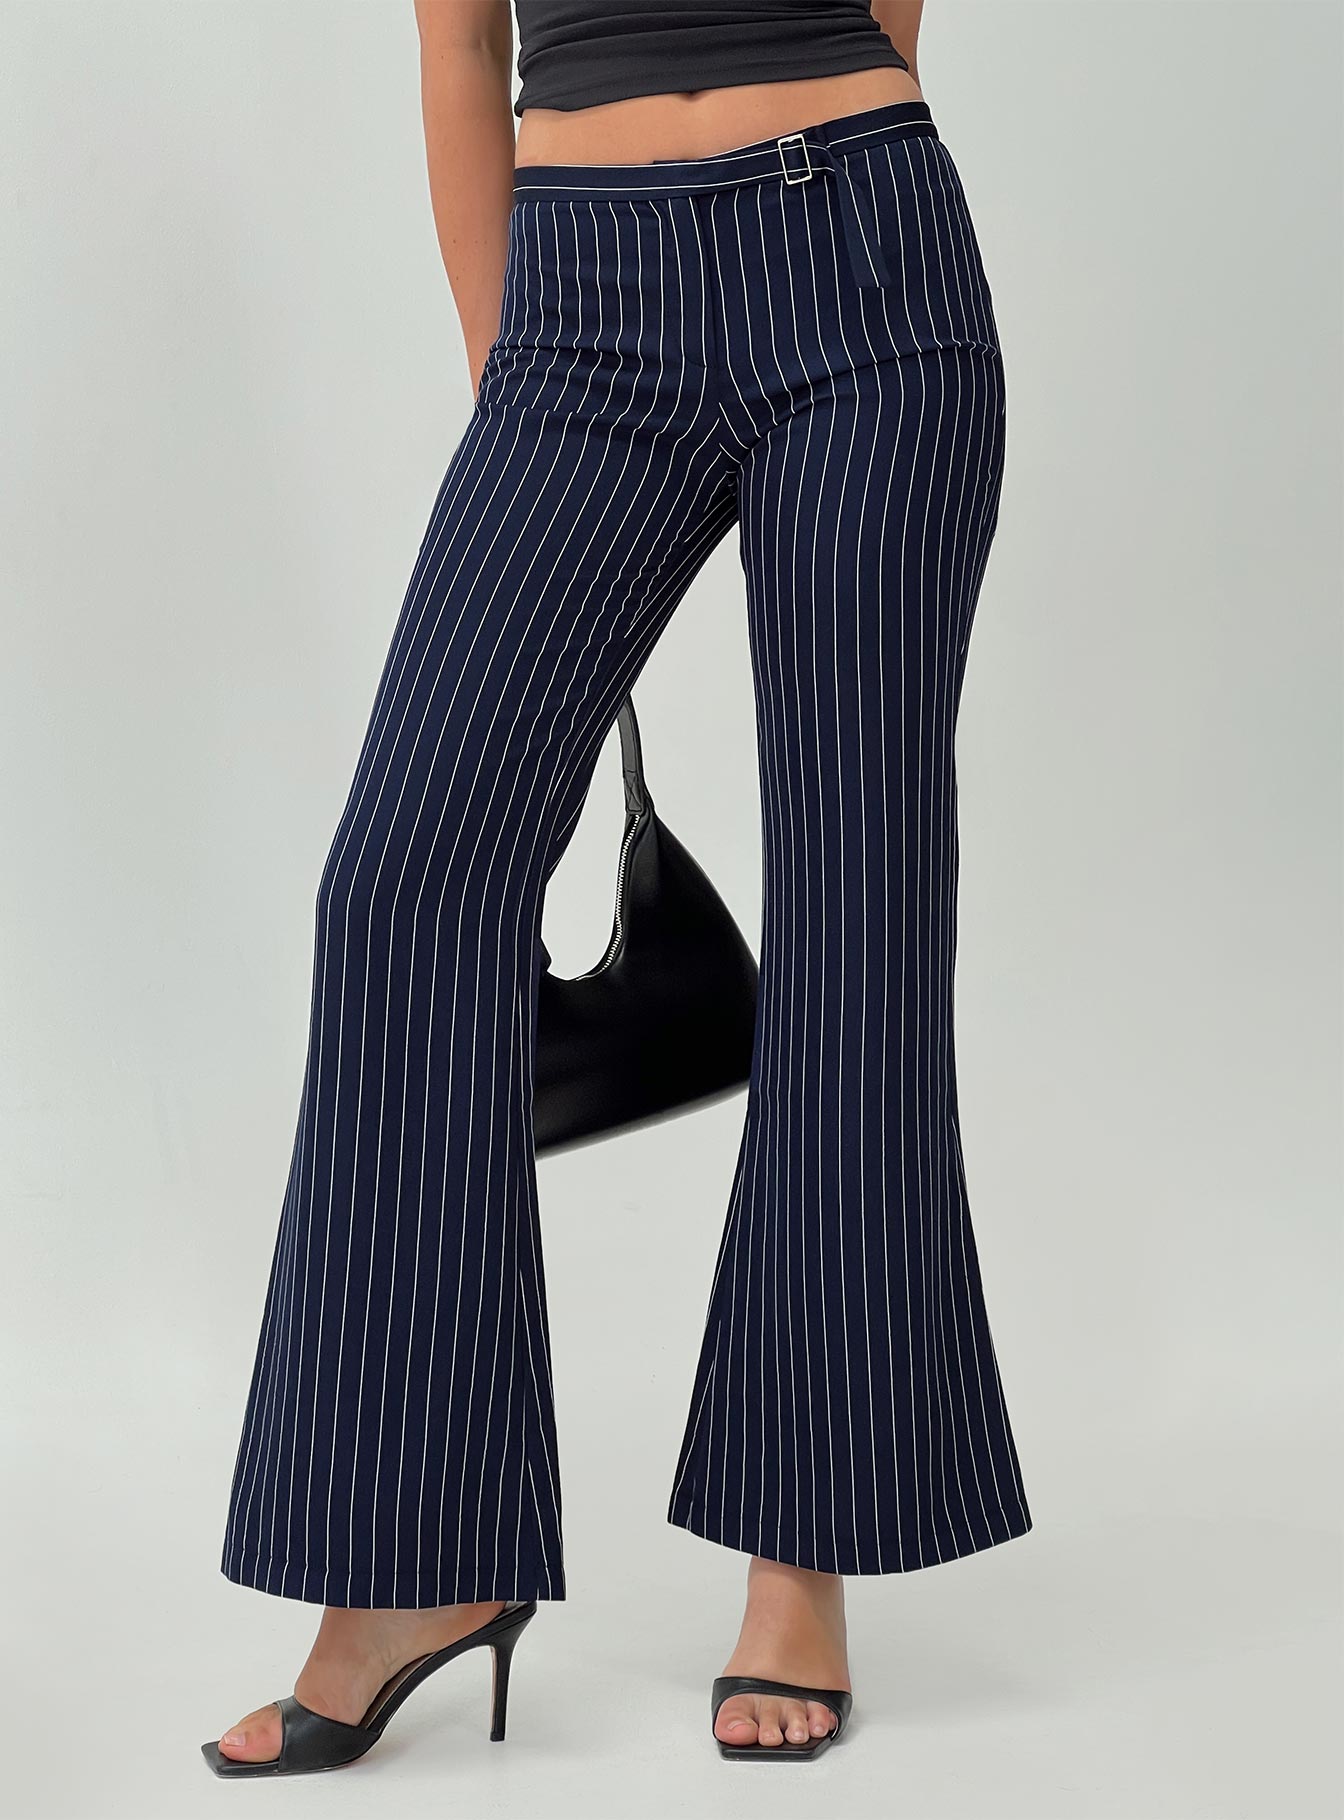 Solada Women's wide leg pinstriped trousers: for sale at 14.99€ on  Mecshopping.it